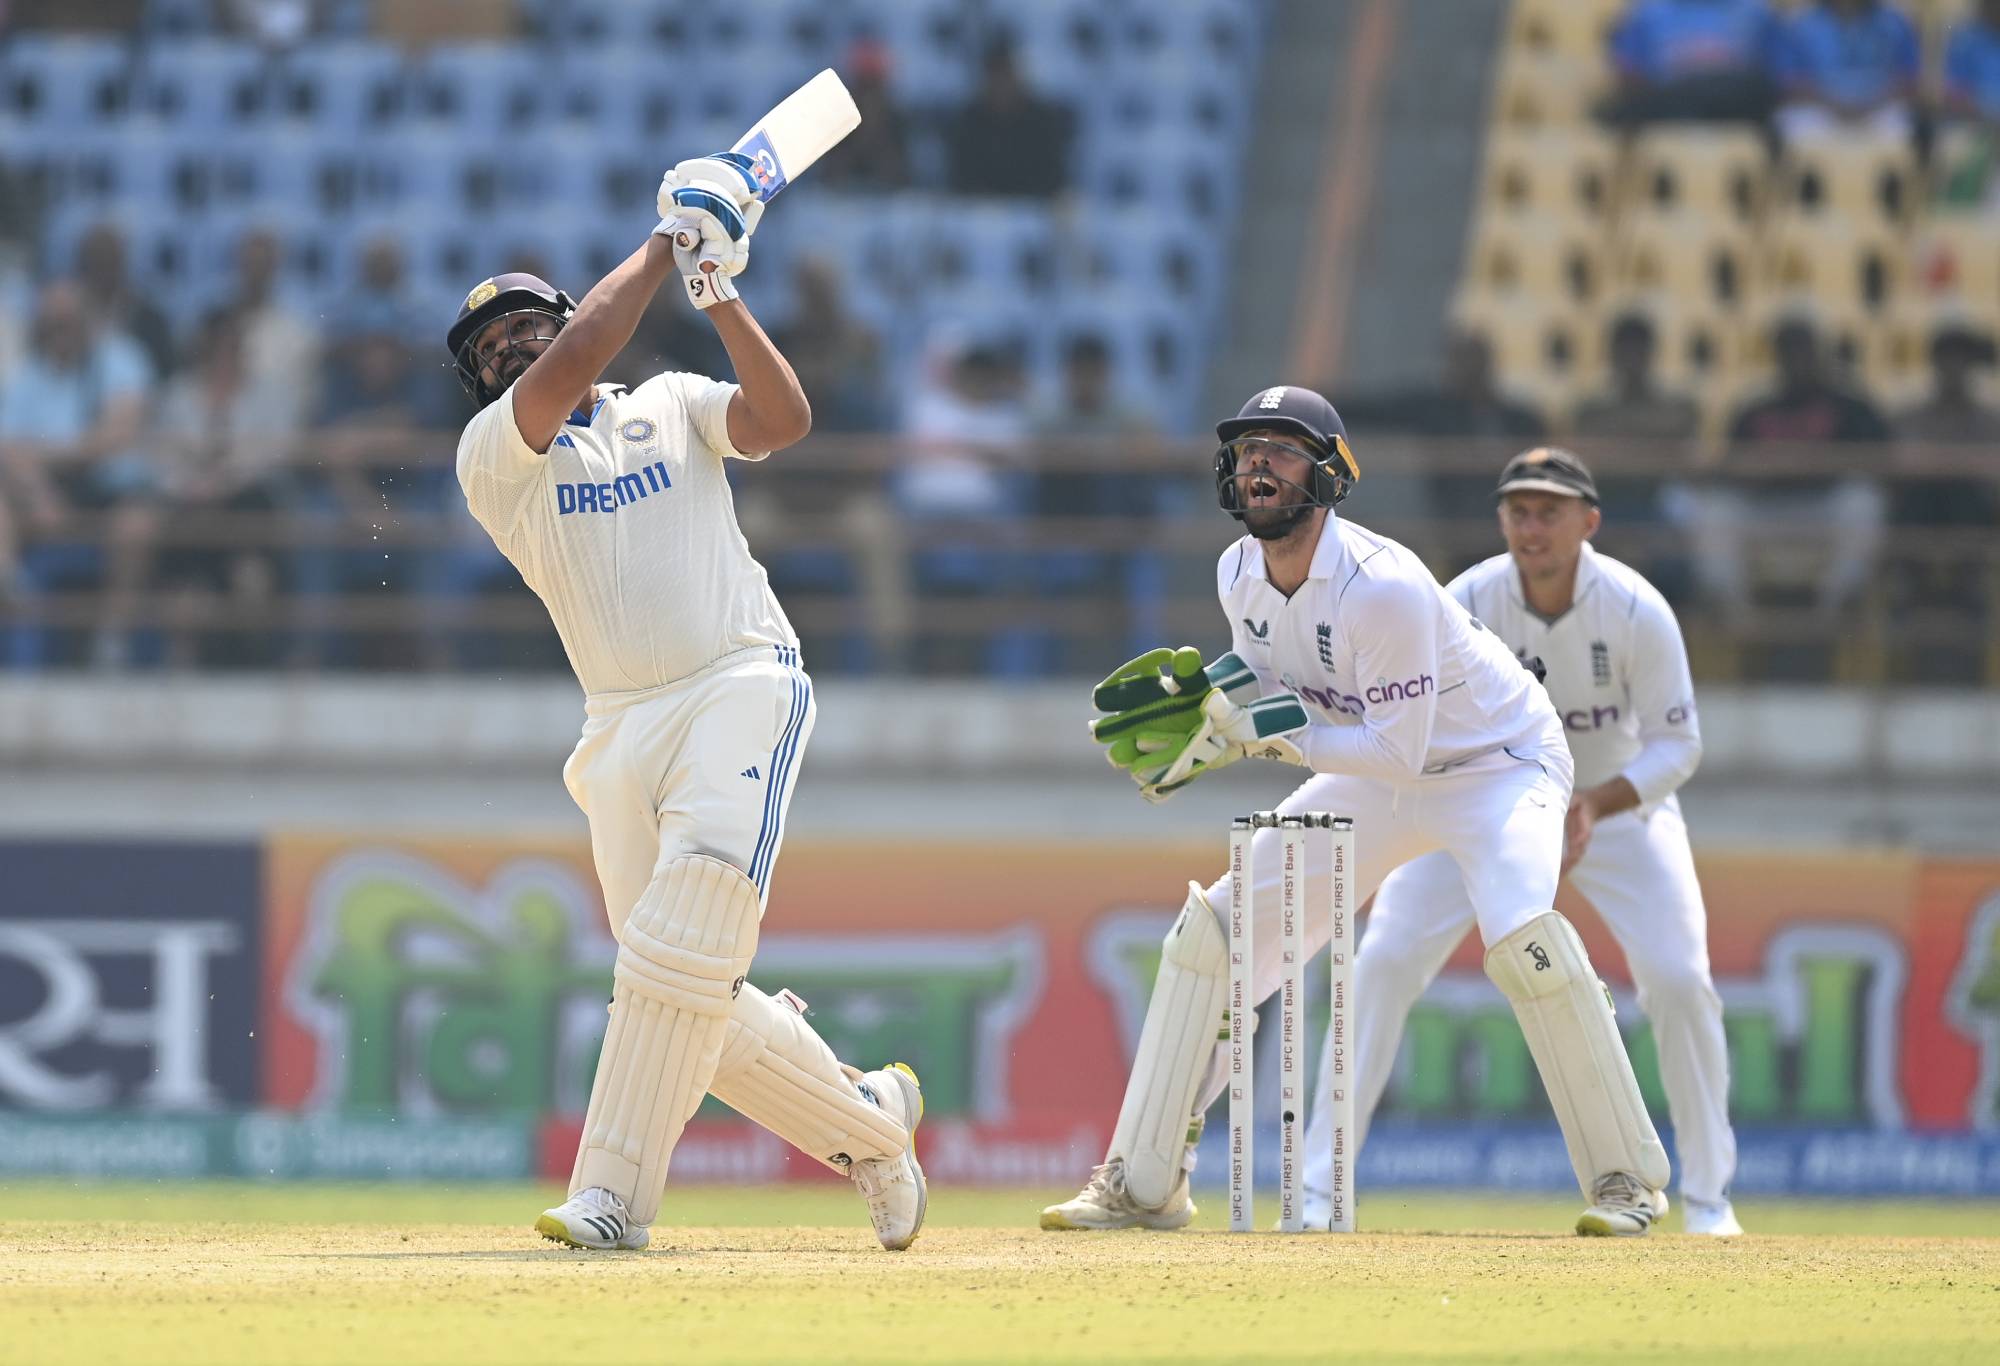 RAJKOT, INDIA - FEBRUARY 15: England wicketkeeper Ben Foakes looks on as India batsman Rohit Sharma hits out for six runs during day one of the 3rd Test Match between India and England at Saurashtra Cricket Association Stadium on February 15, 2024 in Rajkot, India. (Photo by Gareth Copley/Getty Images)